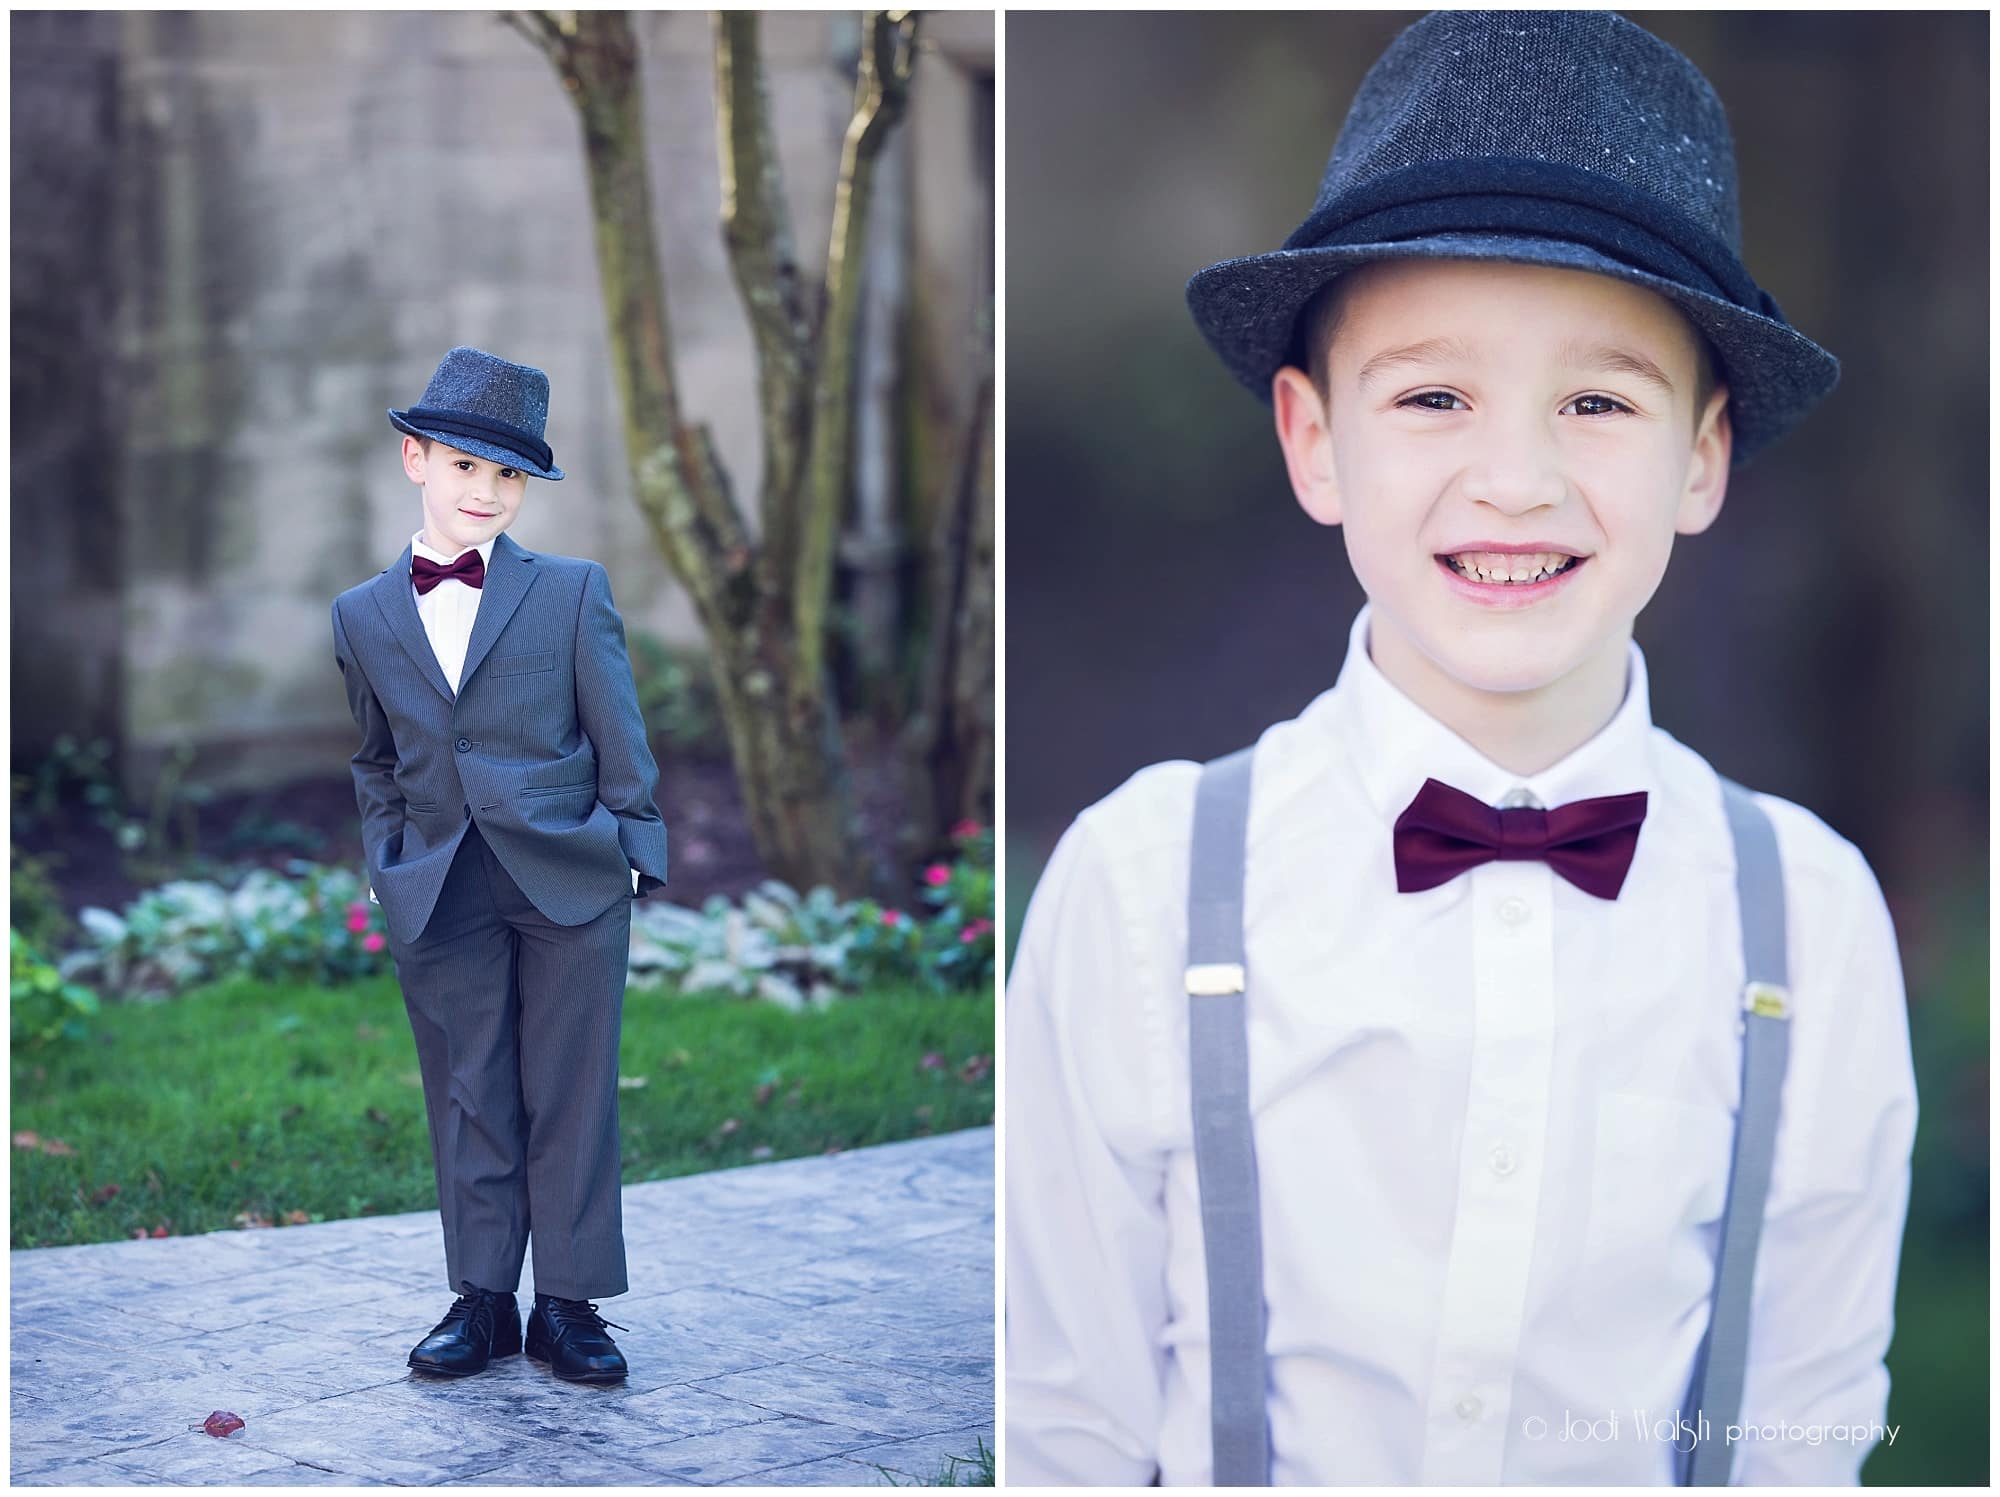 little boy in suit with suspenders and bow tie